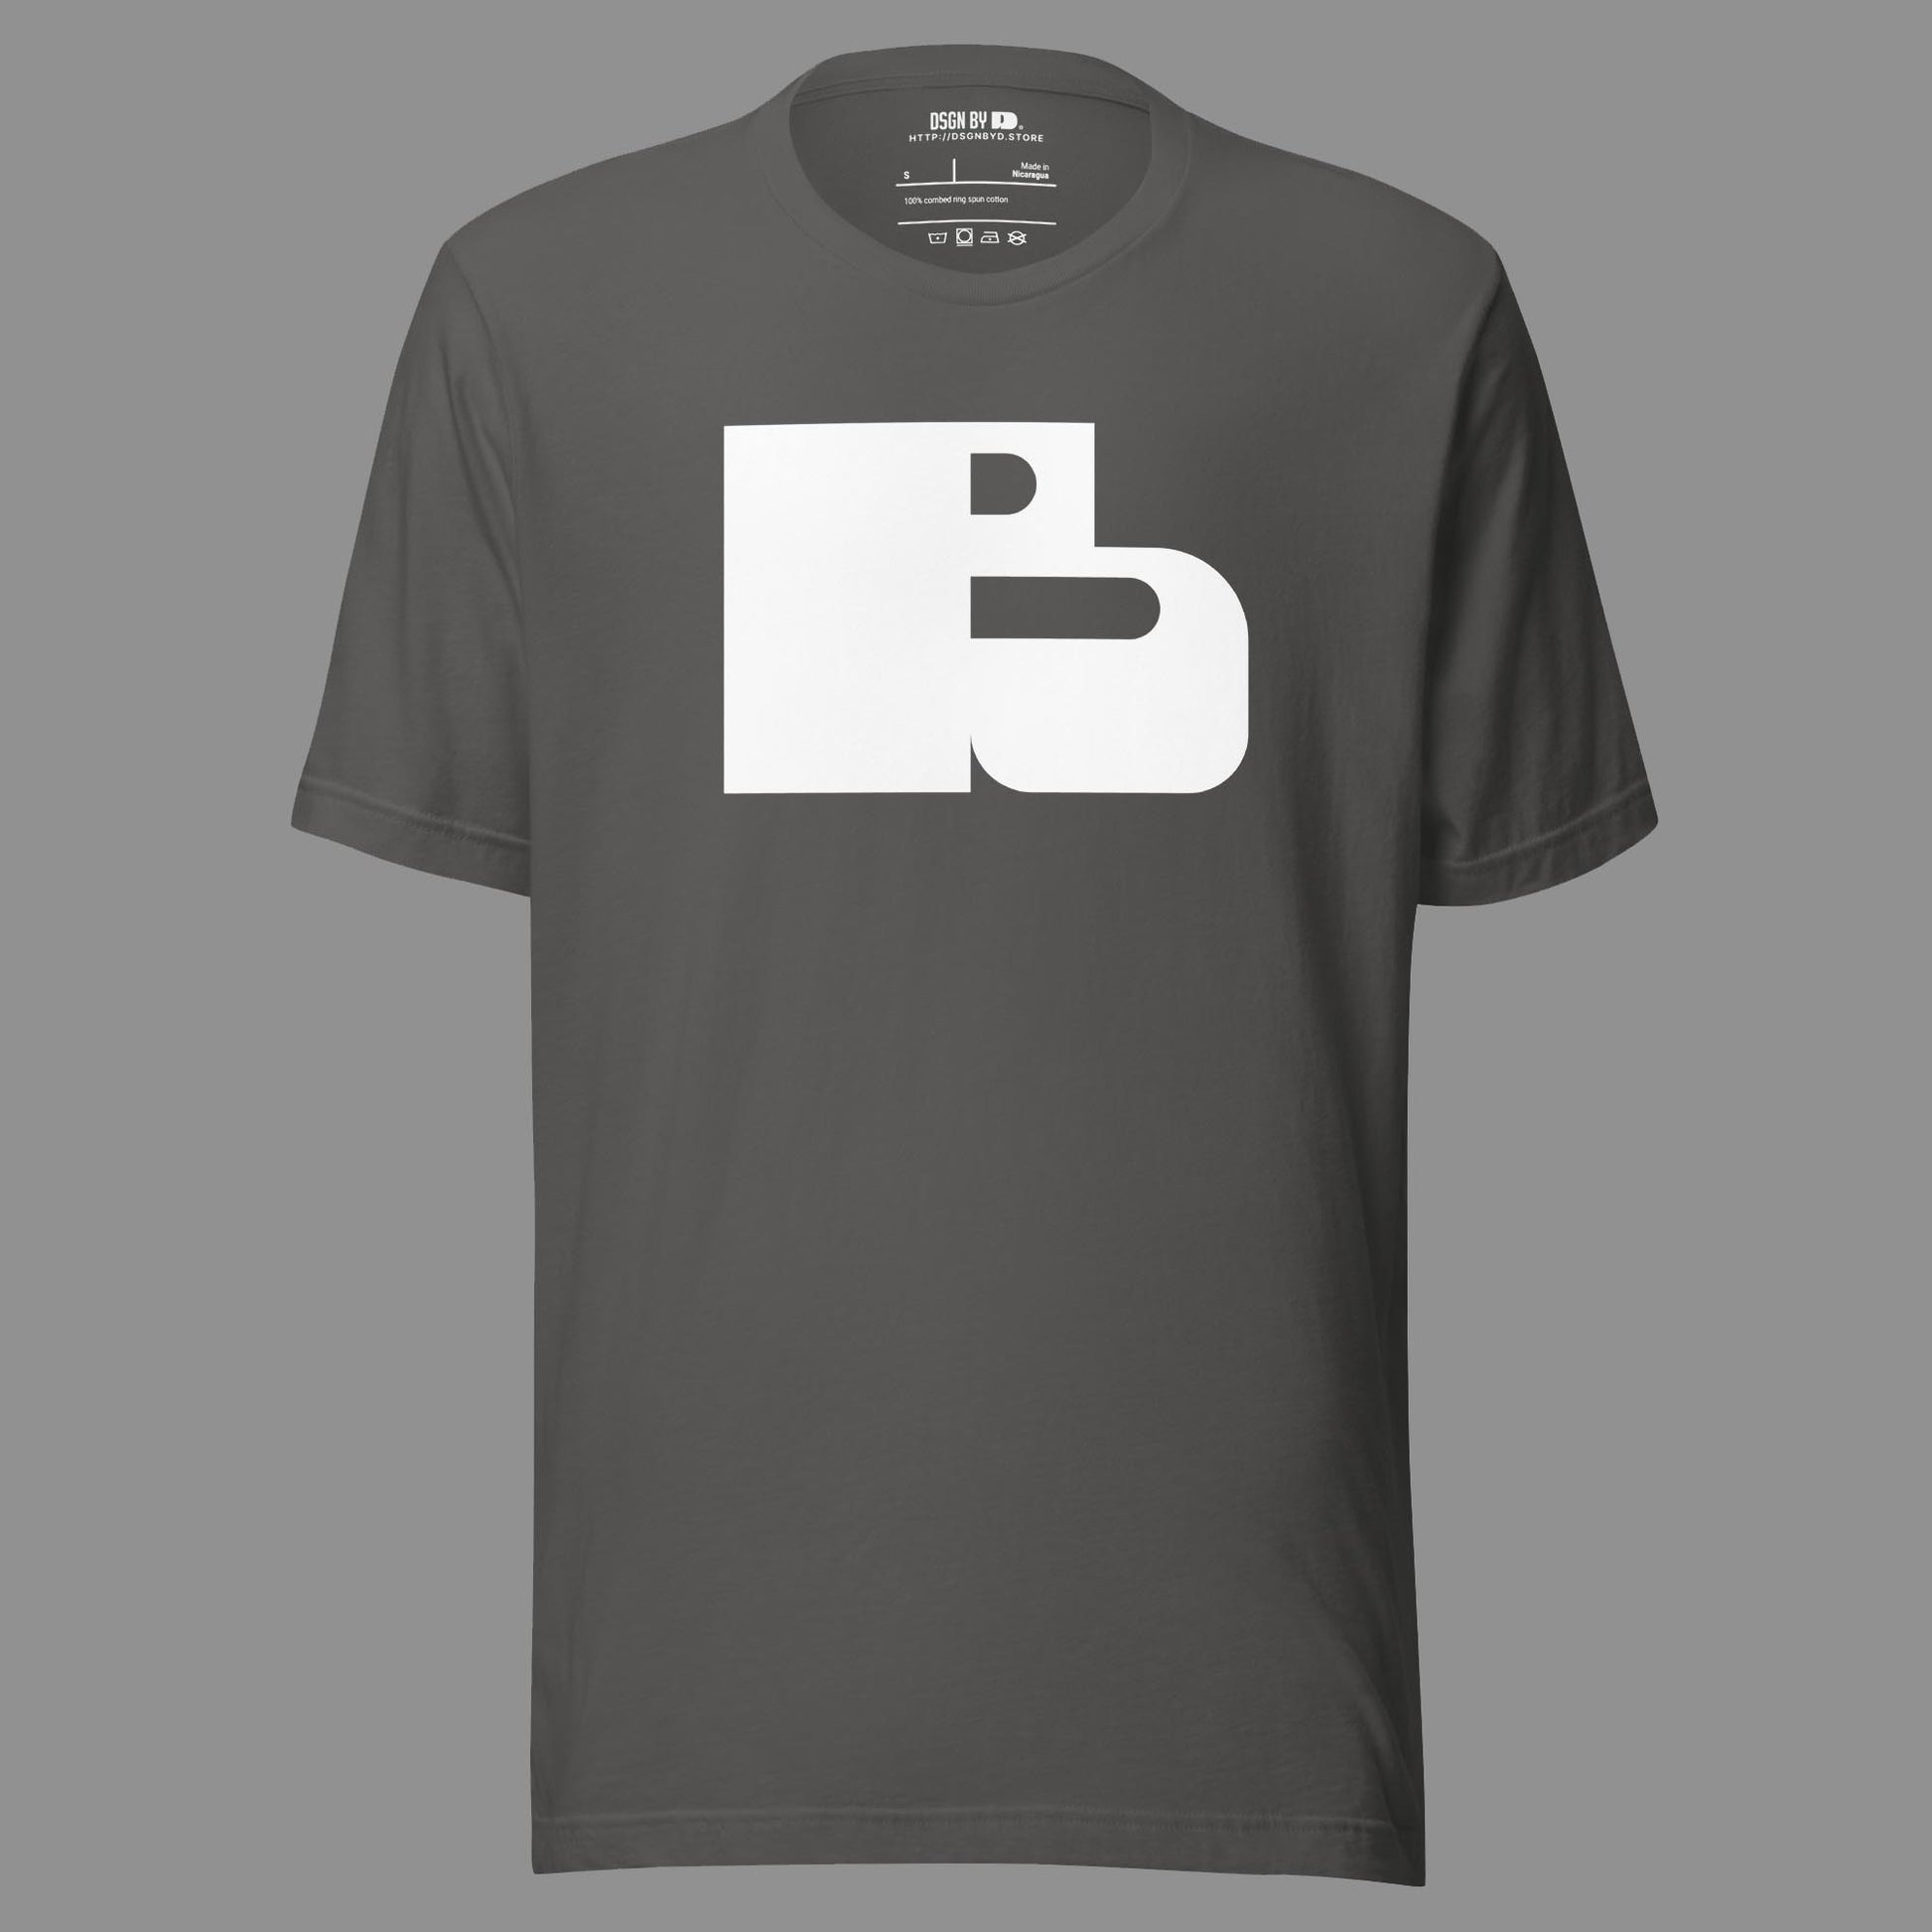 A grey cotton unisex graphic tee with letter B.